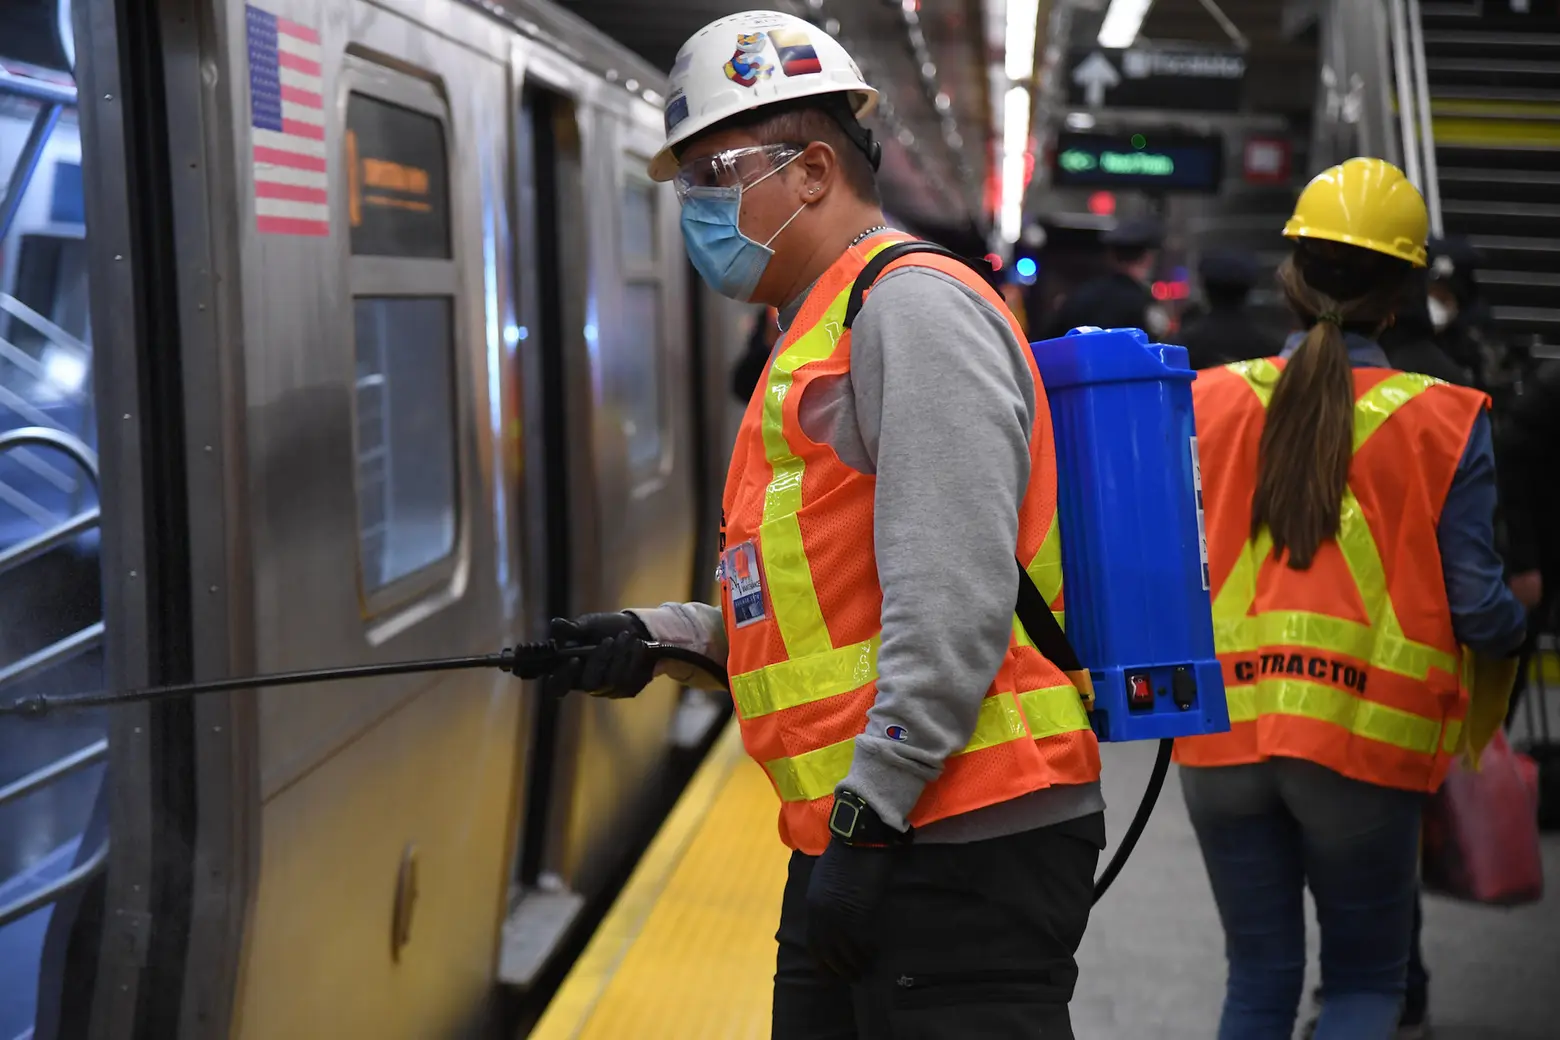 NYC subway shuts down for first time in history; see the COVID-19 disinfection plan in action